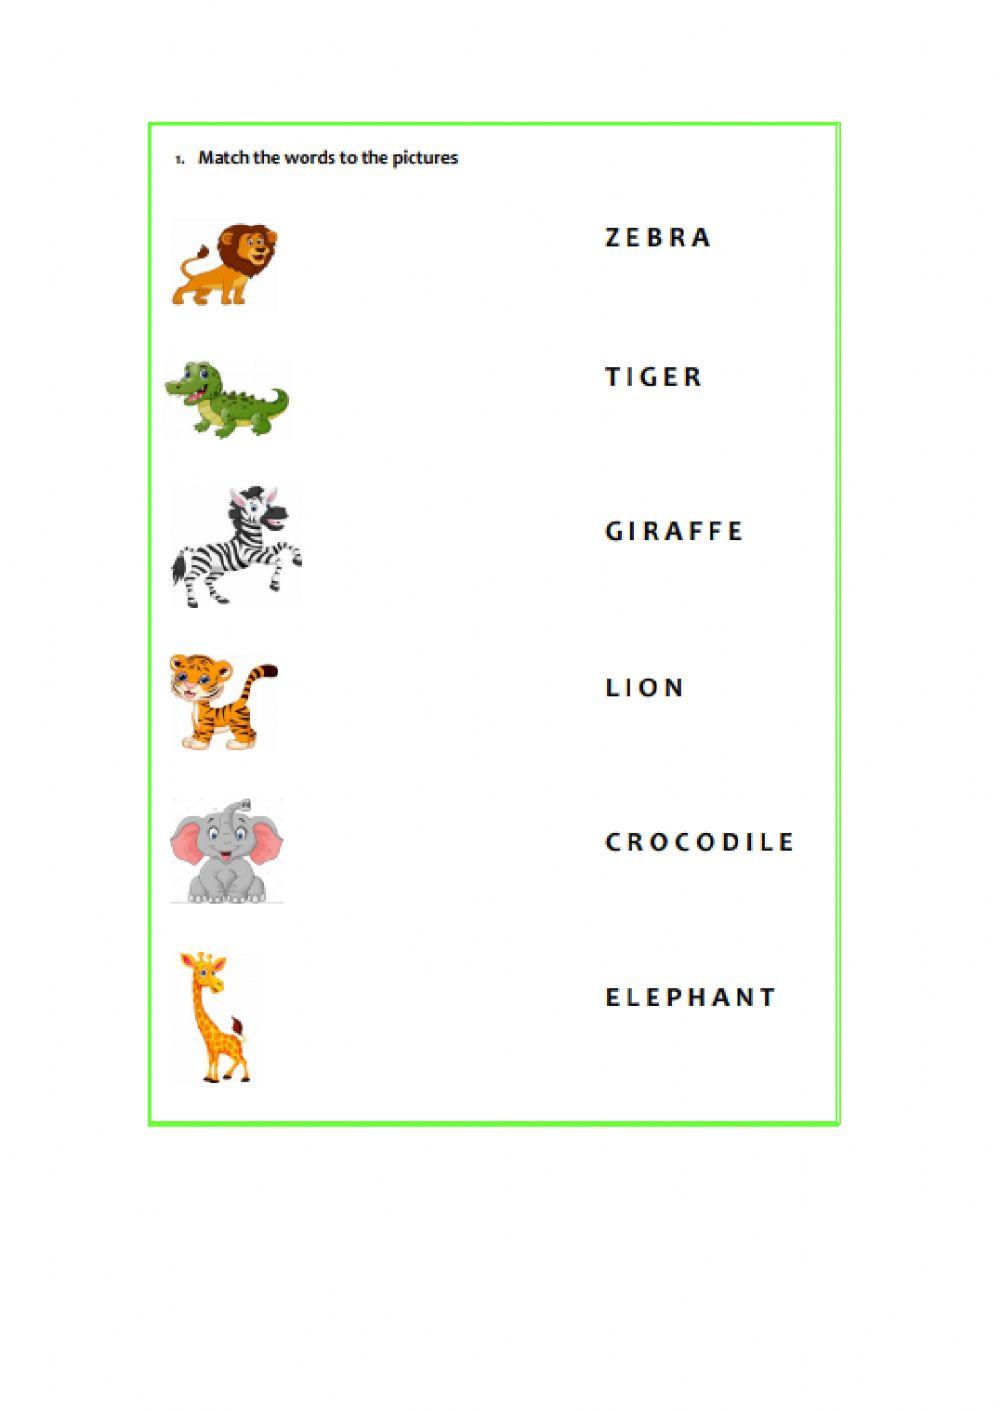 Match the animals to their names